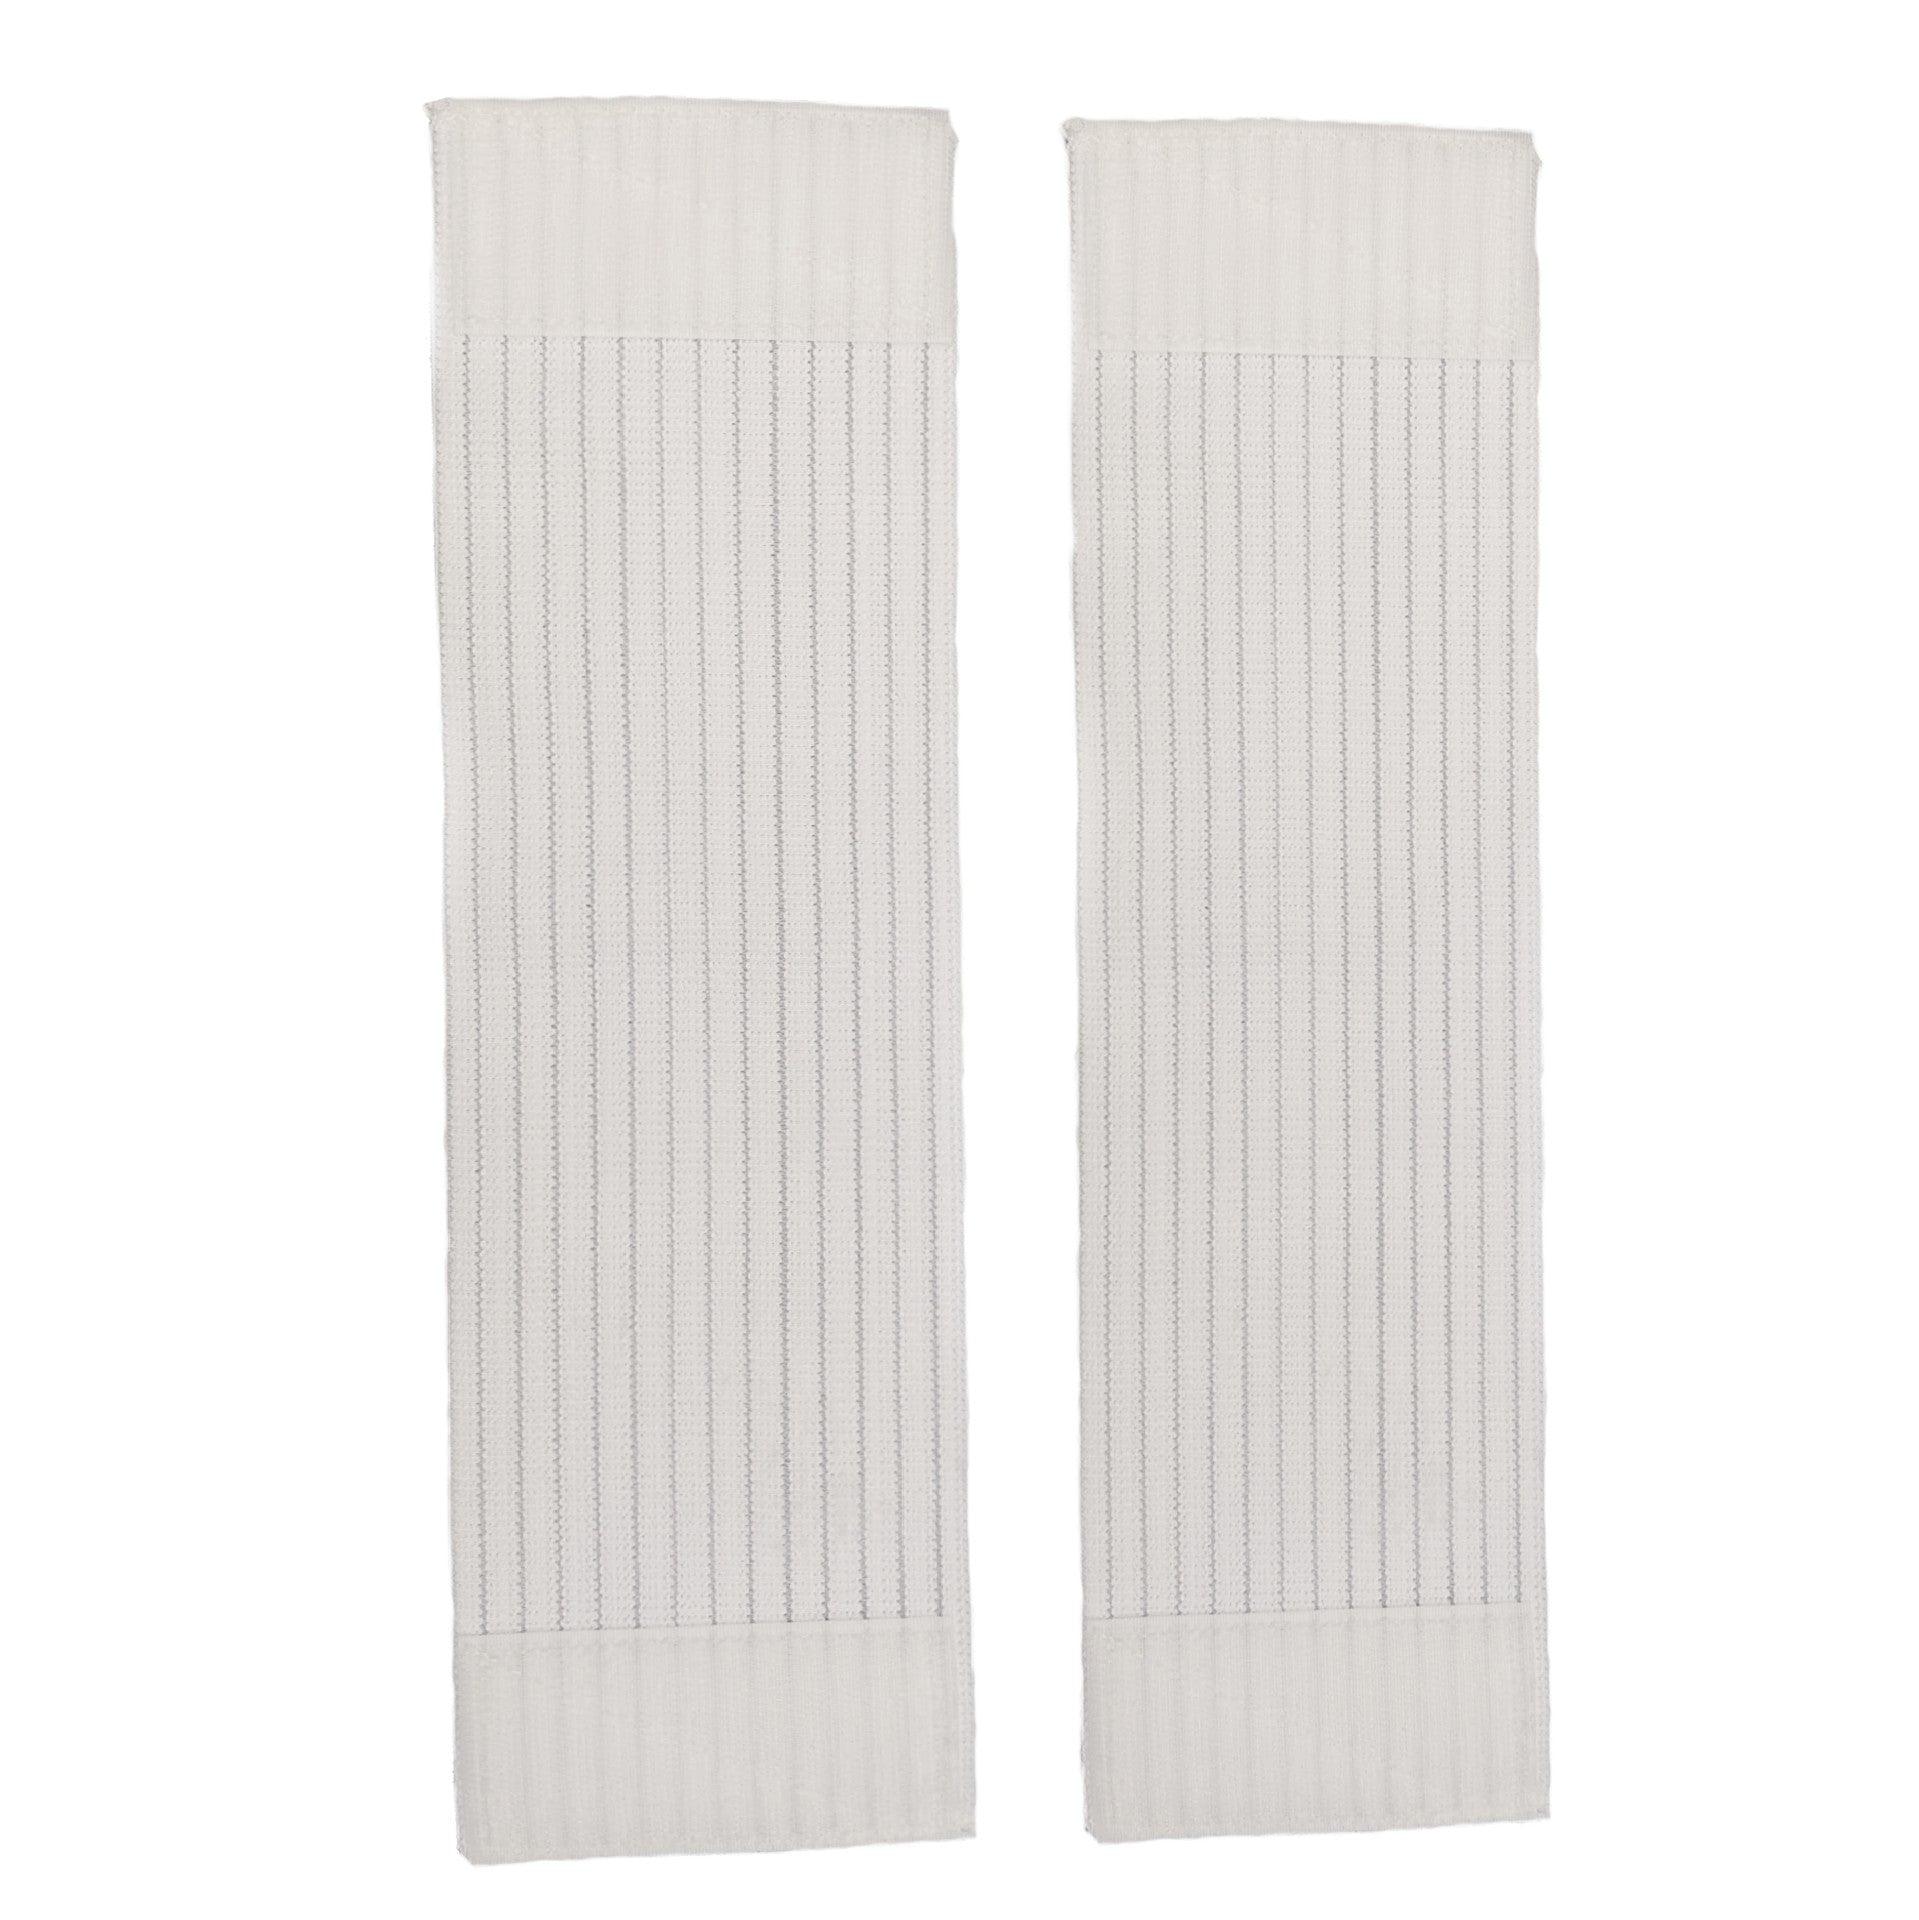 15 Inch Universal Cold Therapy Velcro Straps (2 Pack) - 15UNIVERSALSTRAP 15 Inch Universal Cold Therapy Velcro Straps (2 Pack) - undefined by Supply Physical Therapy Accessories, Accessory, Aircast Accessories, Best Seller, Breg, Breg Accessories, Breg Wave Accessories, Classic3 Accessories, Clear3 Accessories, Compression Straps, DonJoy, Ossur, Replacement, Straps, Wraps